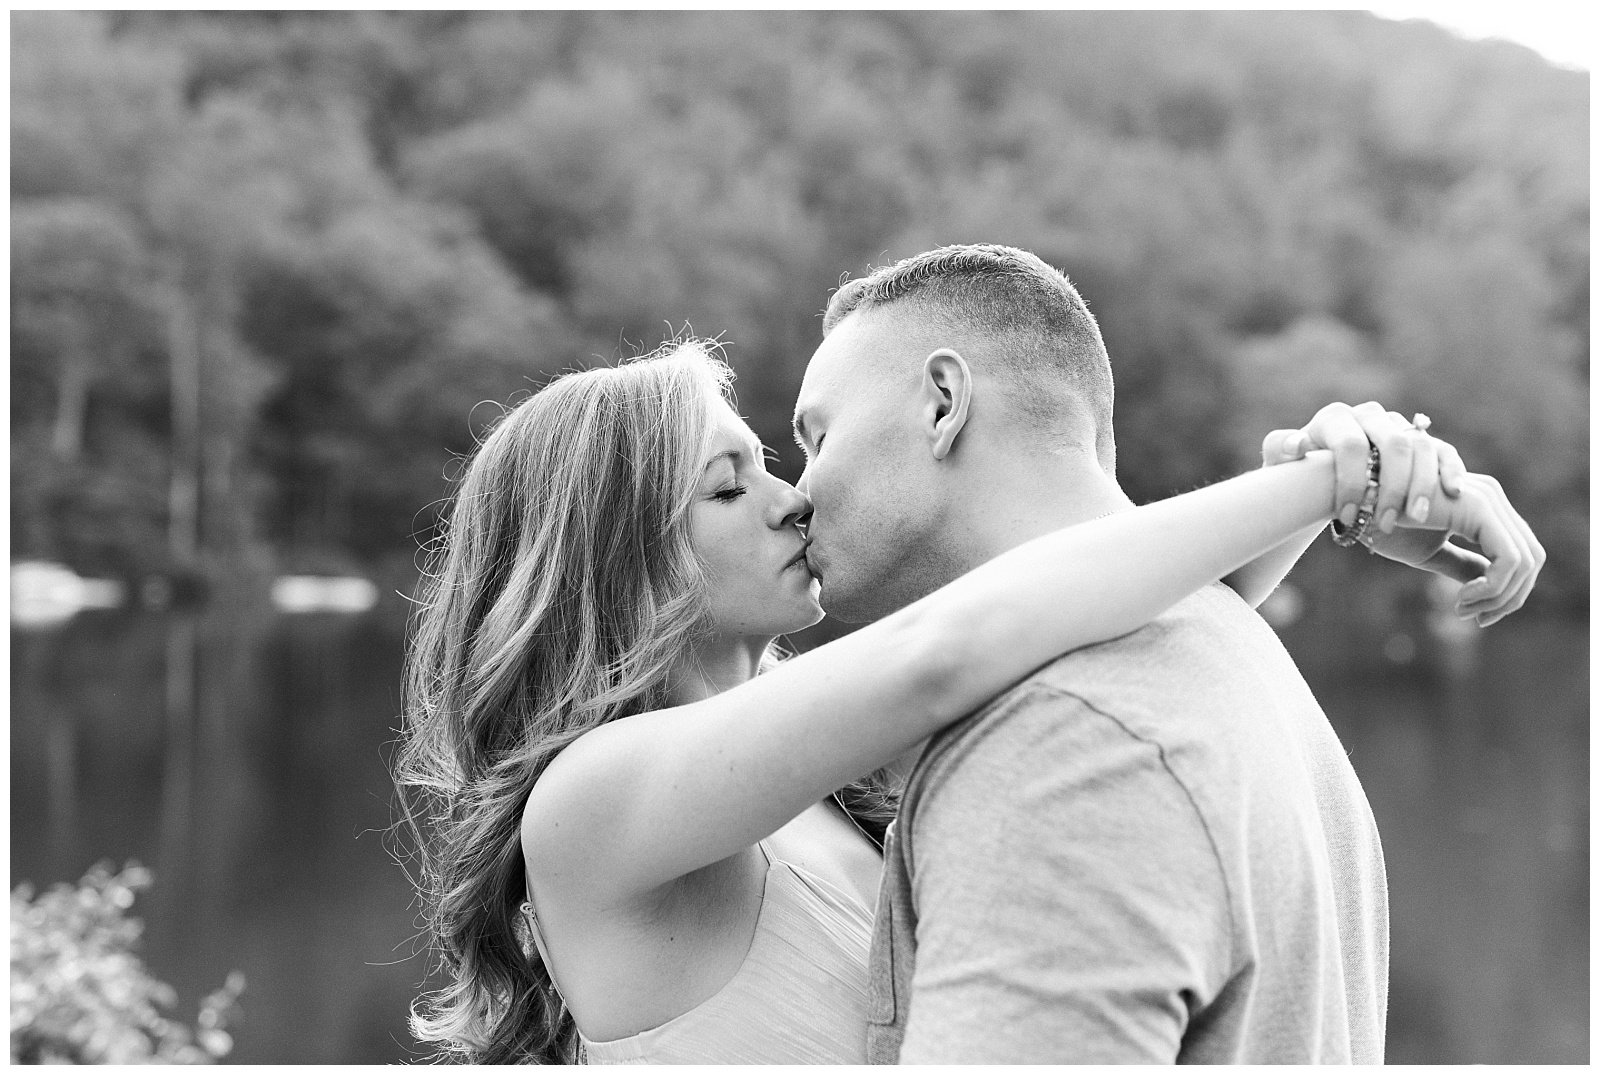 A couple kisses in front of a lake, in black and white.